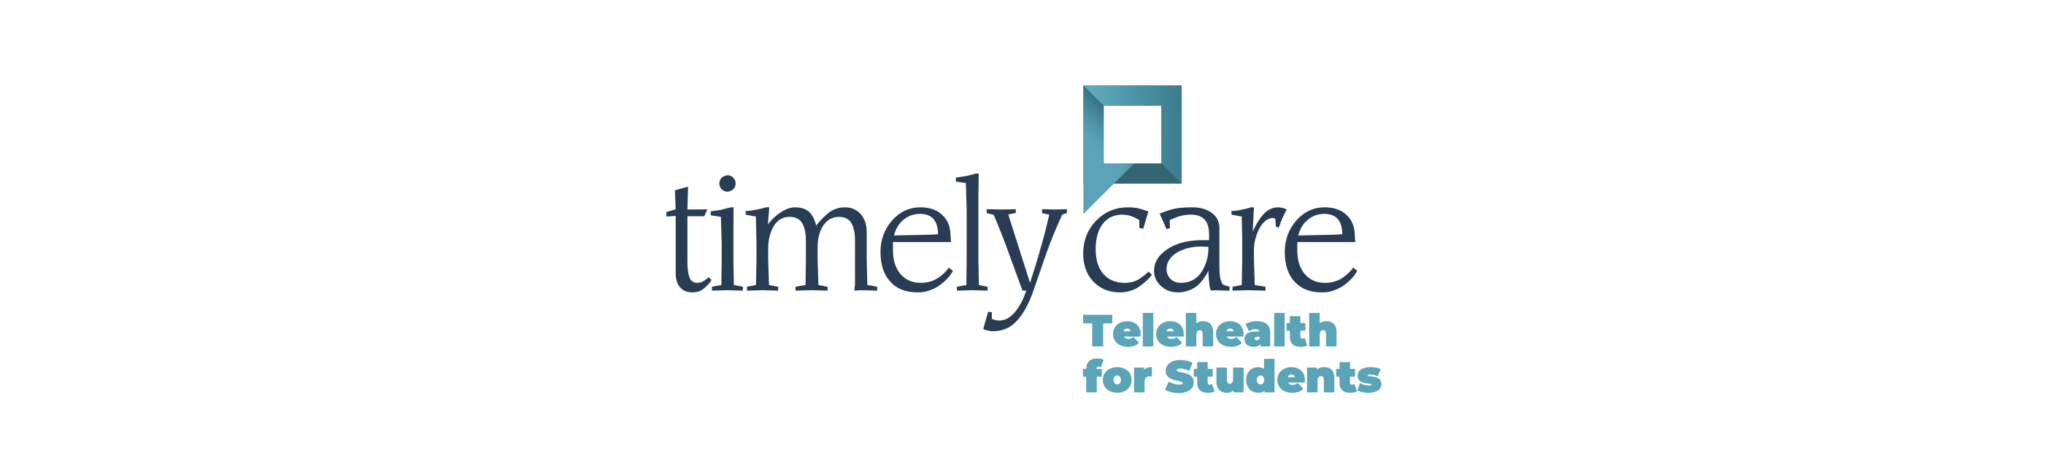 timely care-telehealth for students